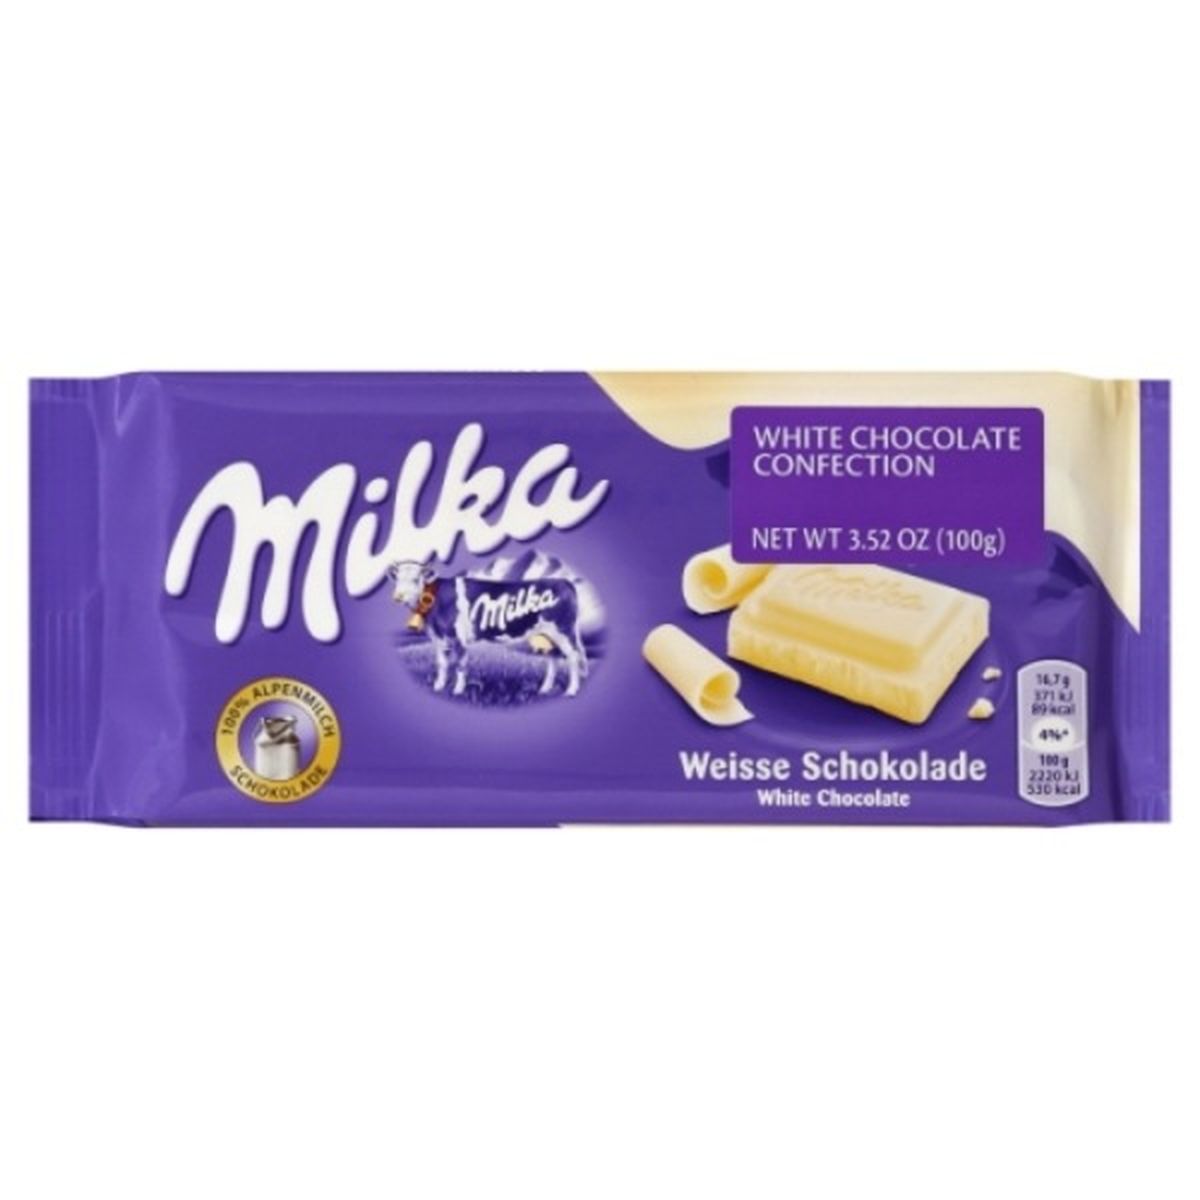 Calories in Milka White Chocolate Confection